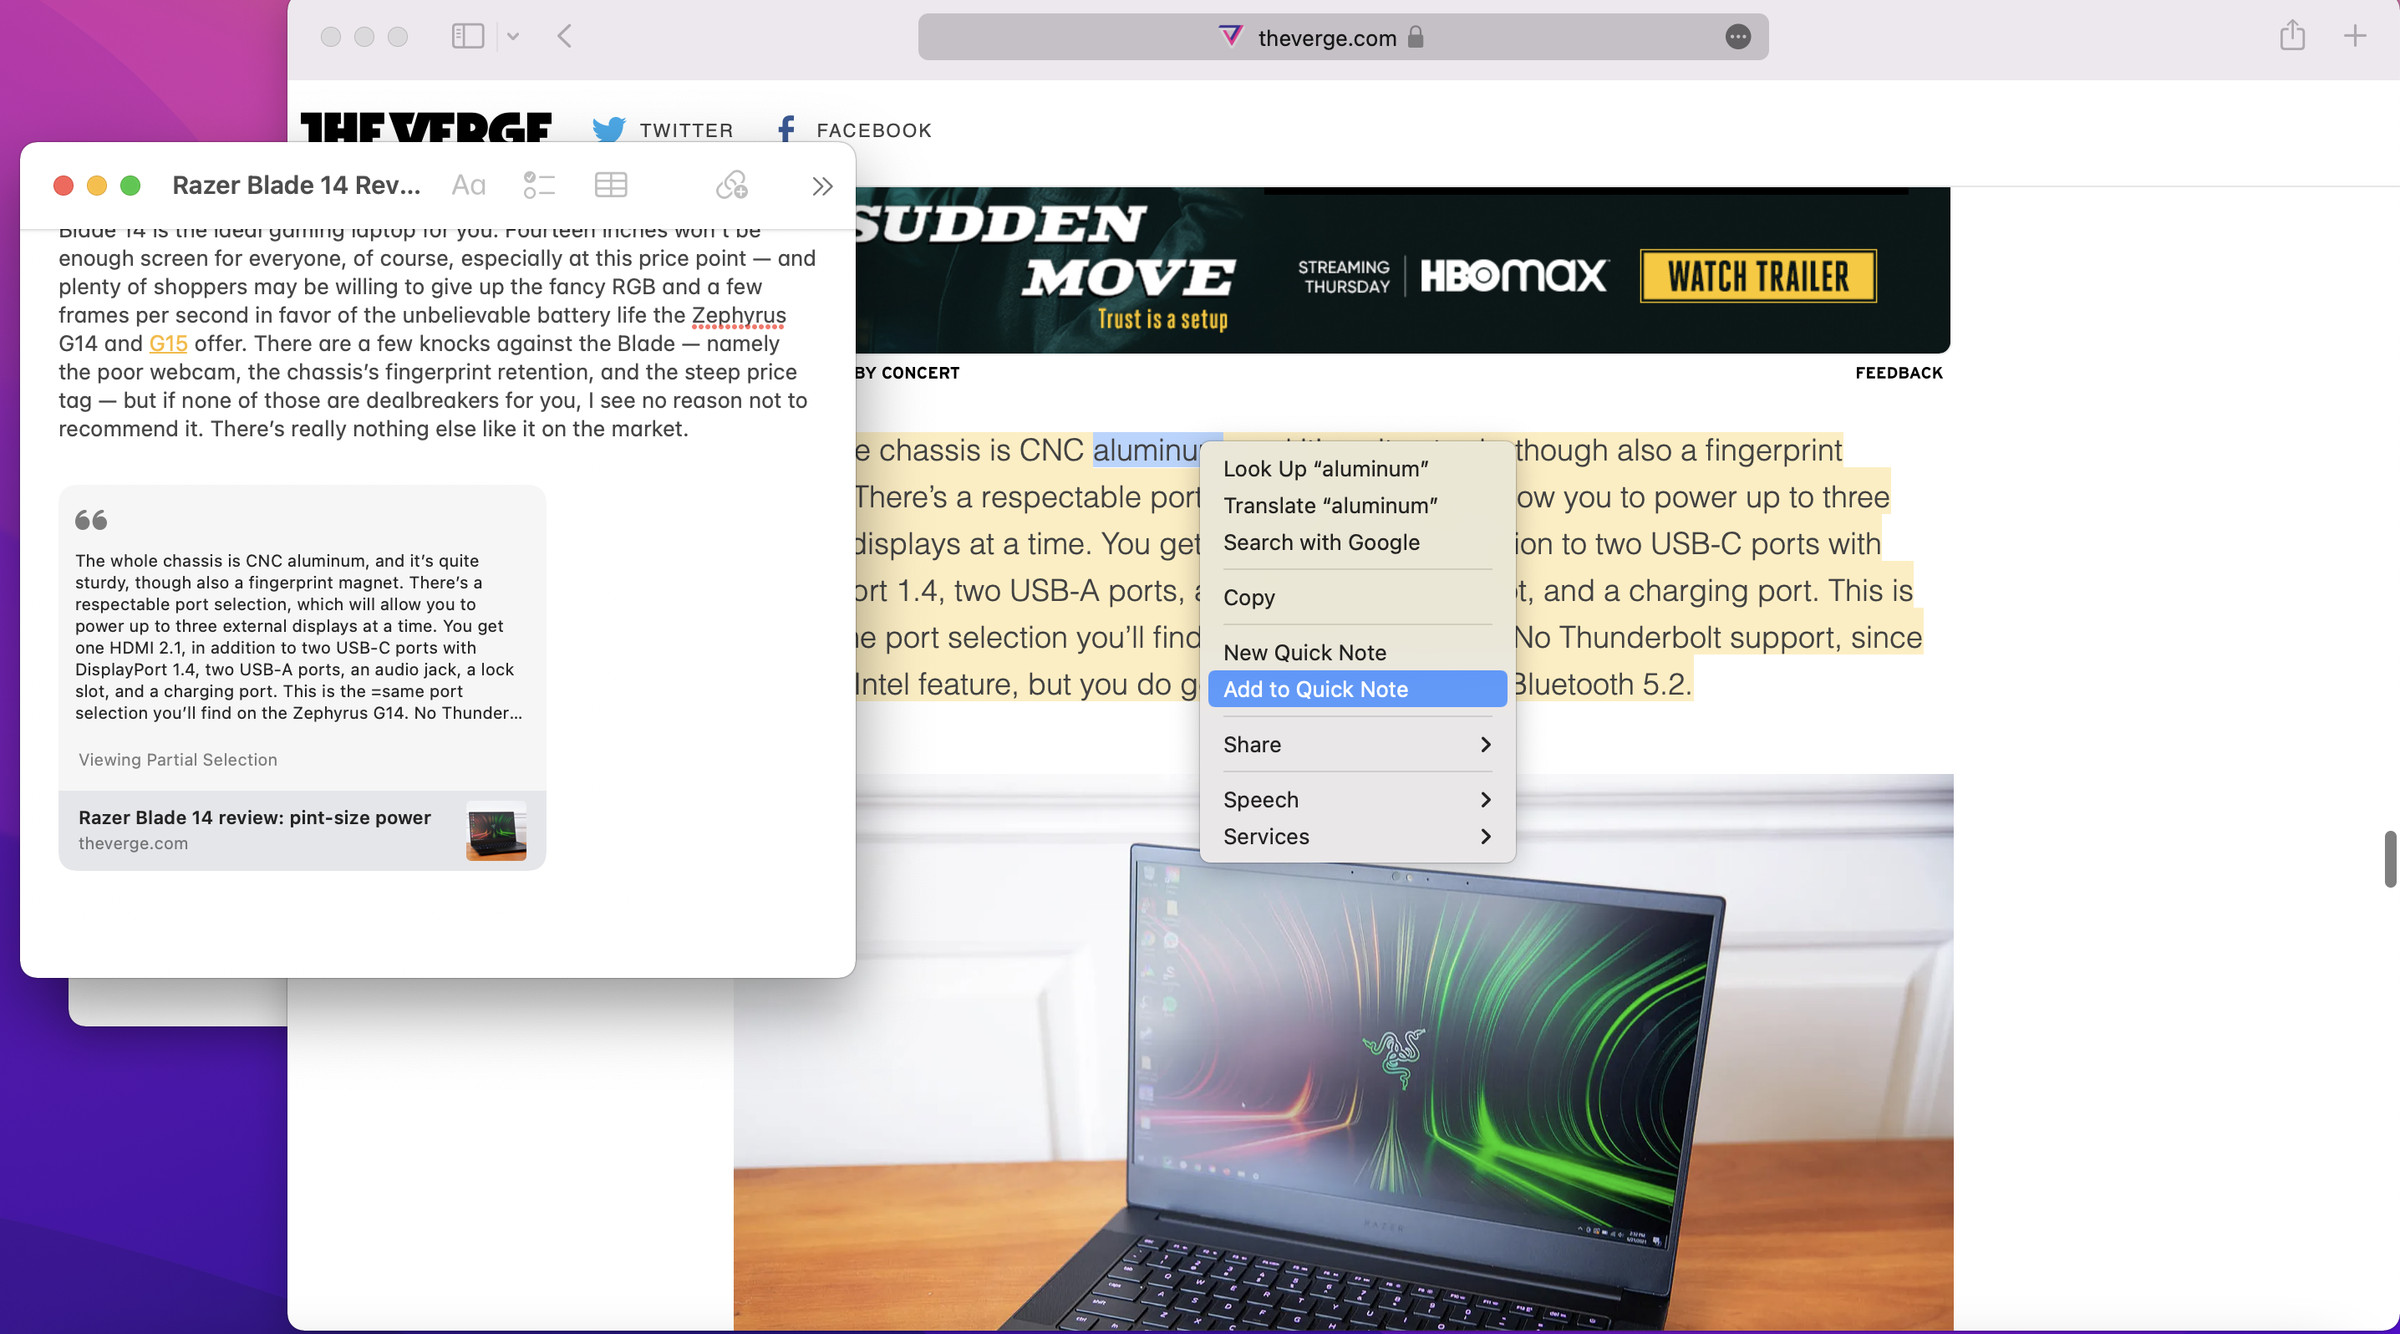 A screenshot of a MacBook Pro screen. The Verge’s review of the Razer Blade 14 is open in Safari. A paragraph is higlighted with “Add to Quick Note” in an adjacent drop-down menu selected. A Quick Note is open on the left side of the screen with more text and a link to the article.